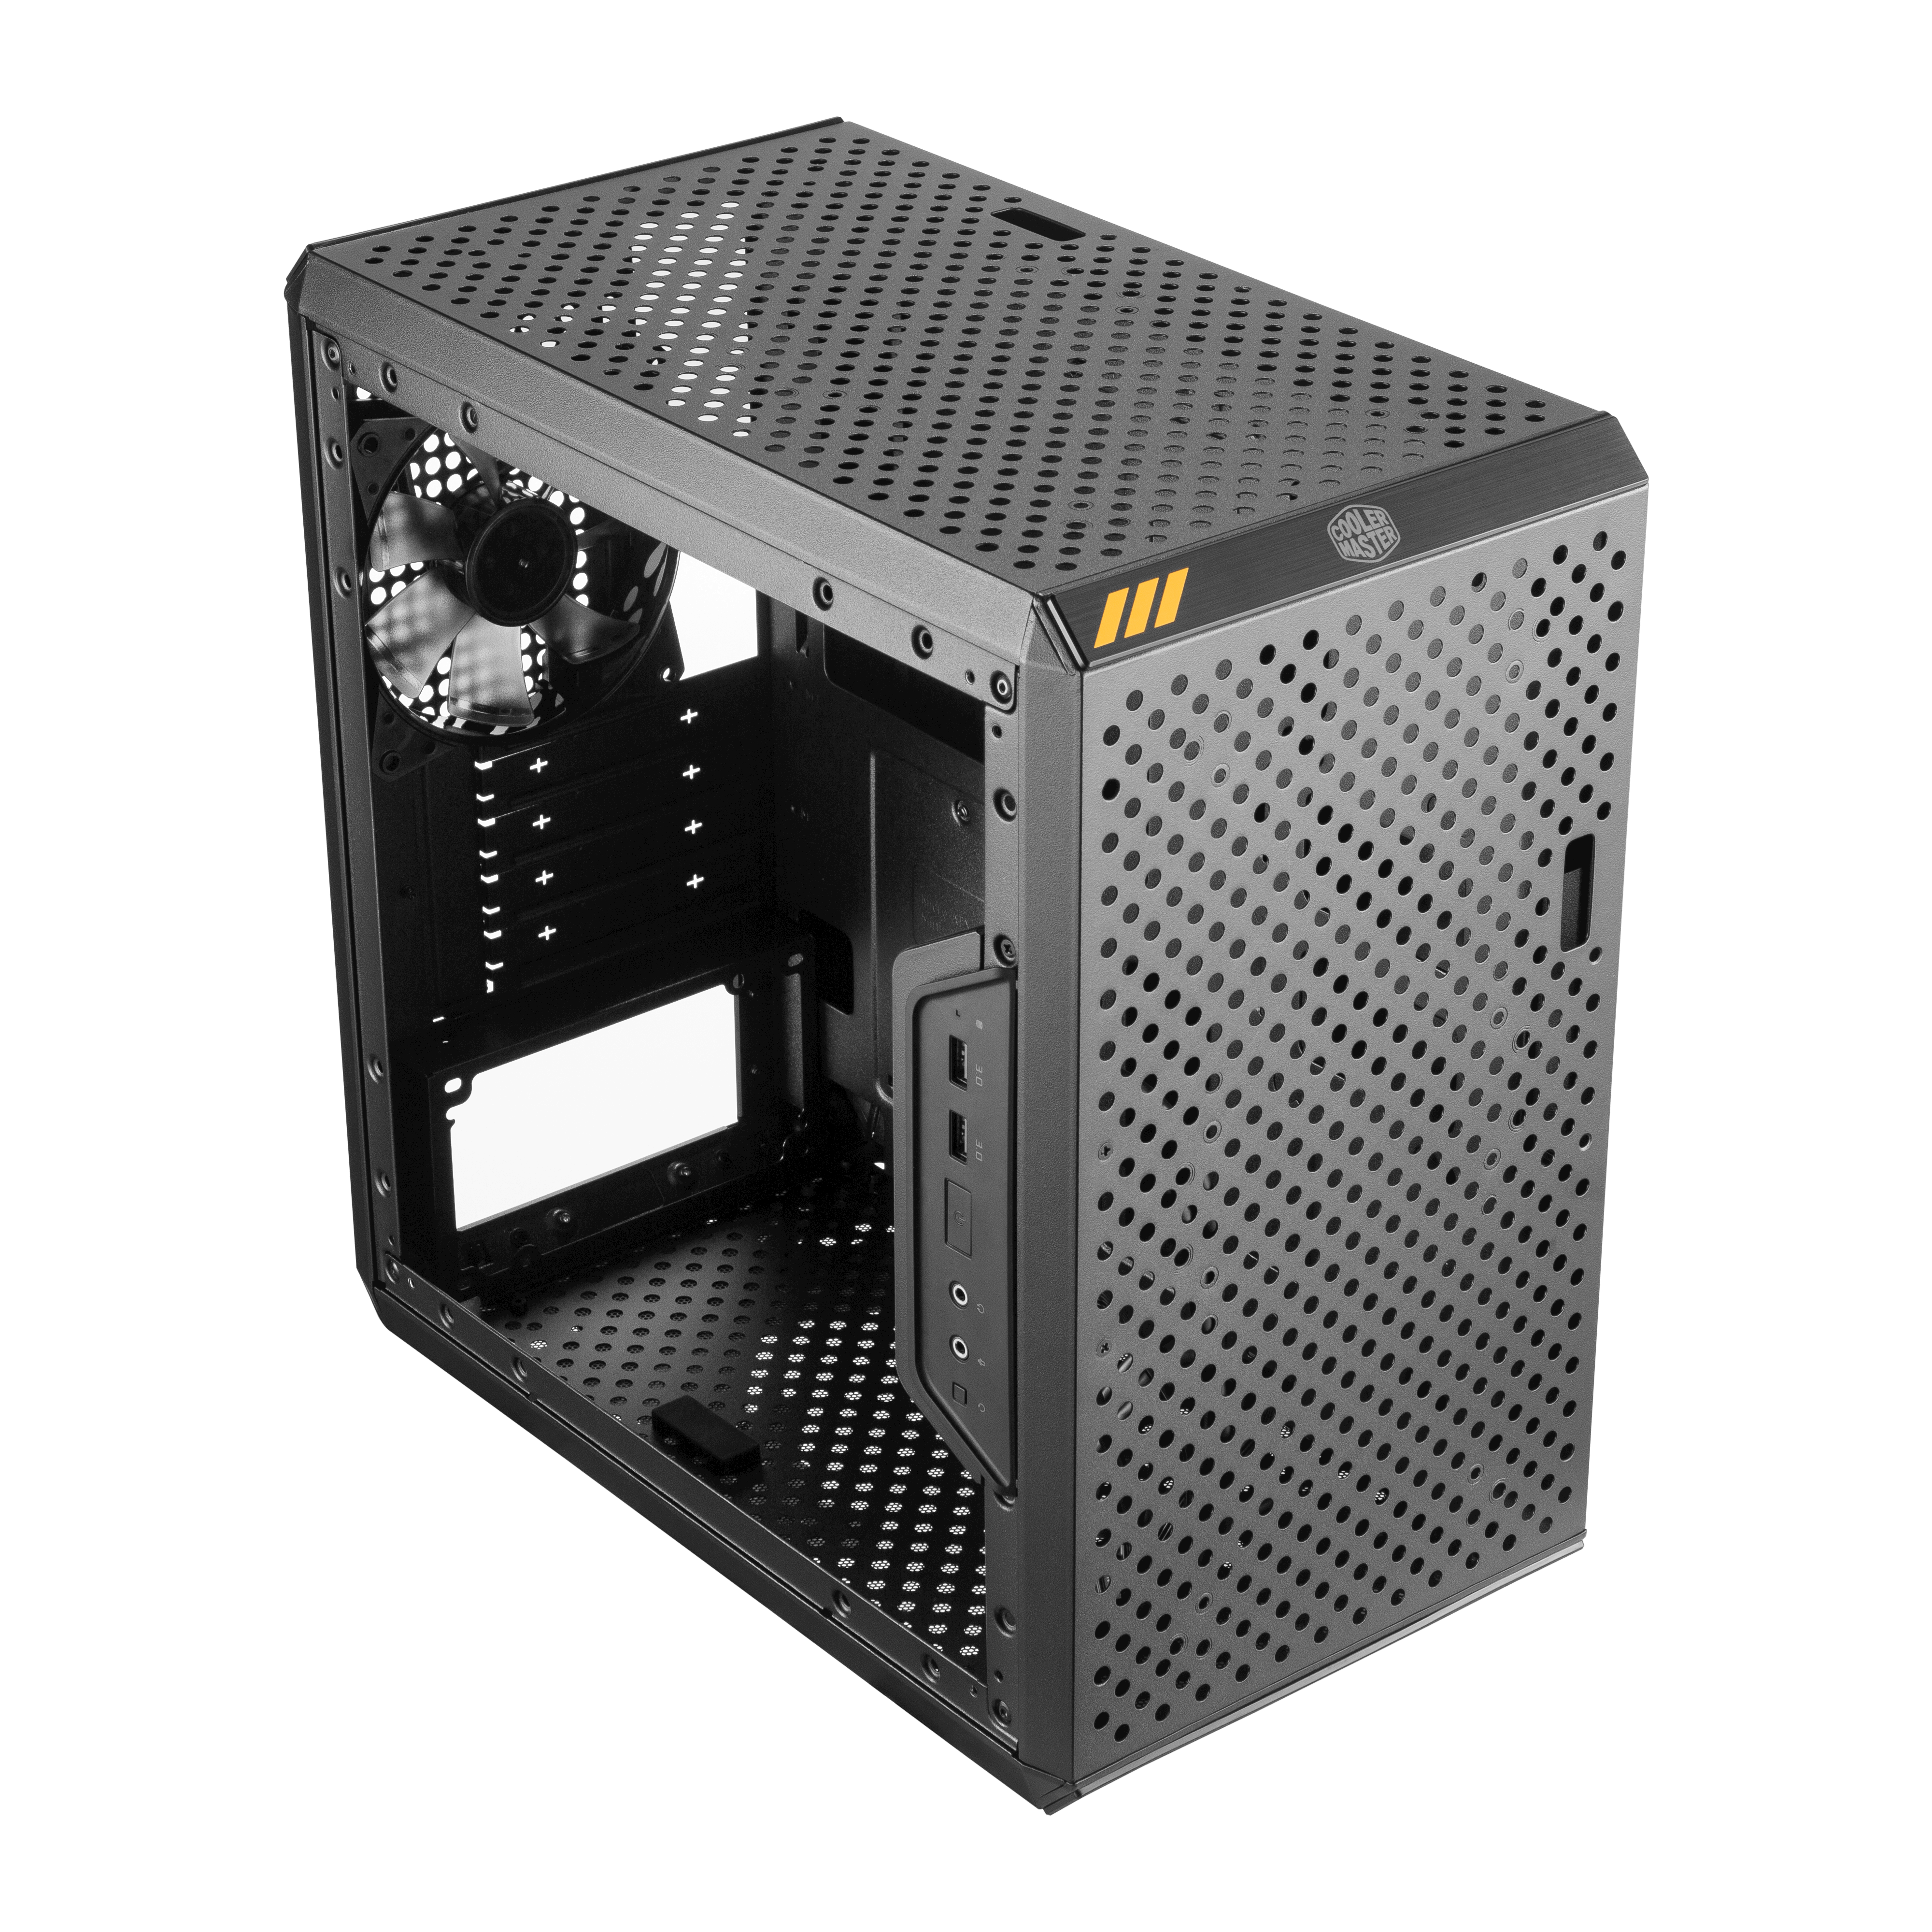 Adjustable I/O & Fully Ventilated for Airflow Transparent Acrylic Side Panel Cooler Master MasterBox Q300L TUF Gaming Alliance Edition mATX Tower w/TUF Aesthetic Design